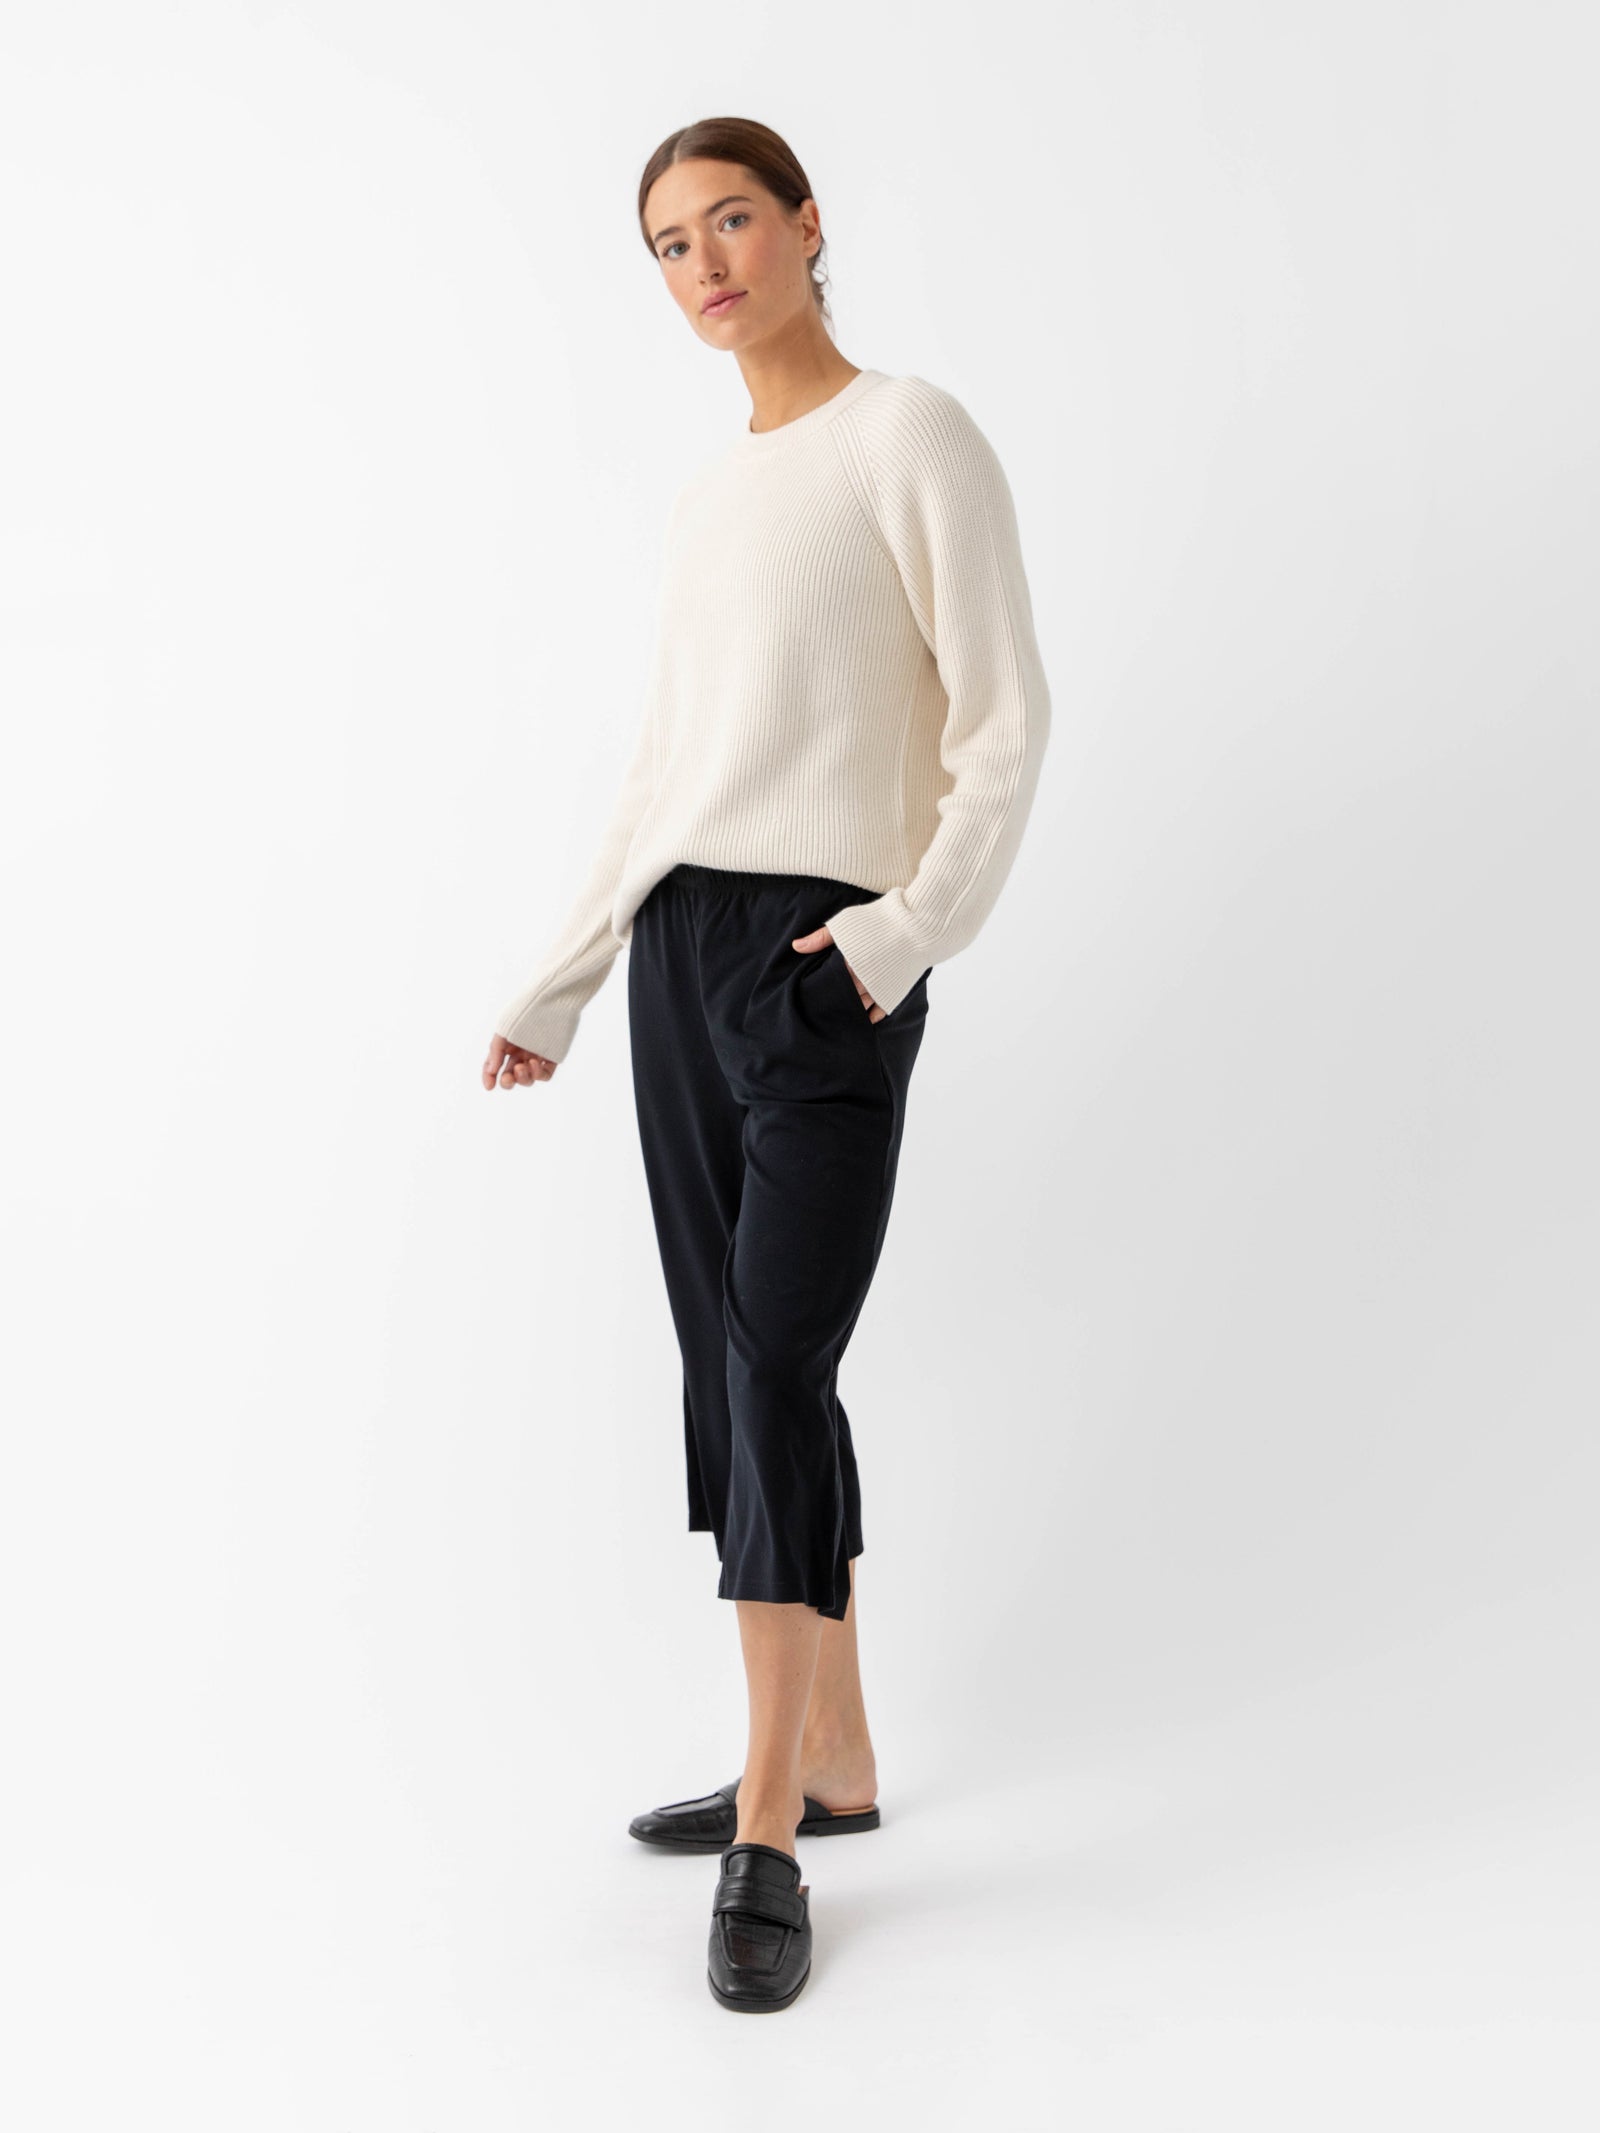 Woman wearing alabaster classic crewneck and black pants with white background 